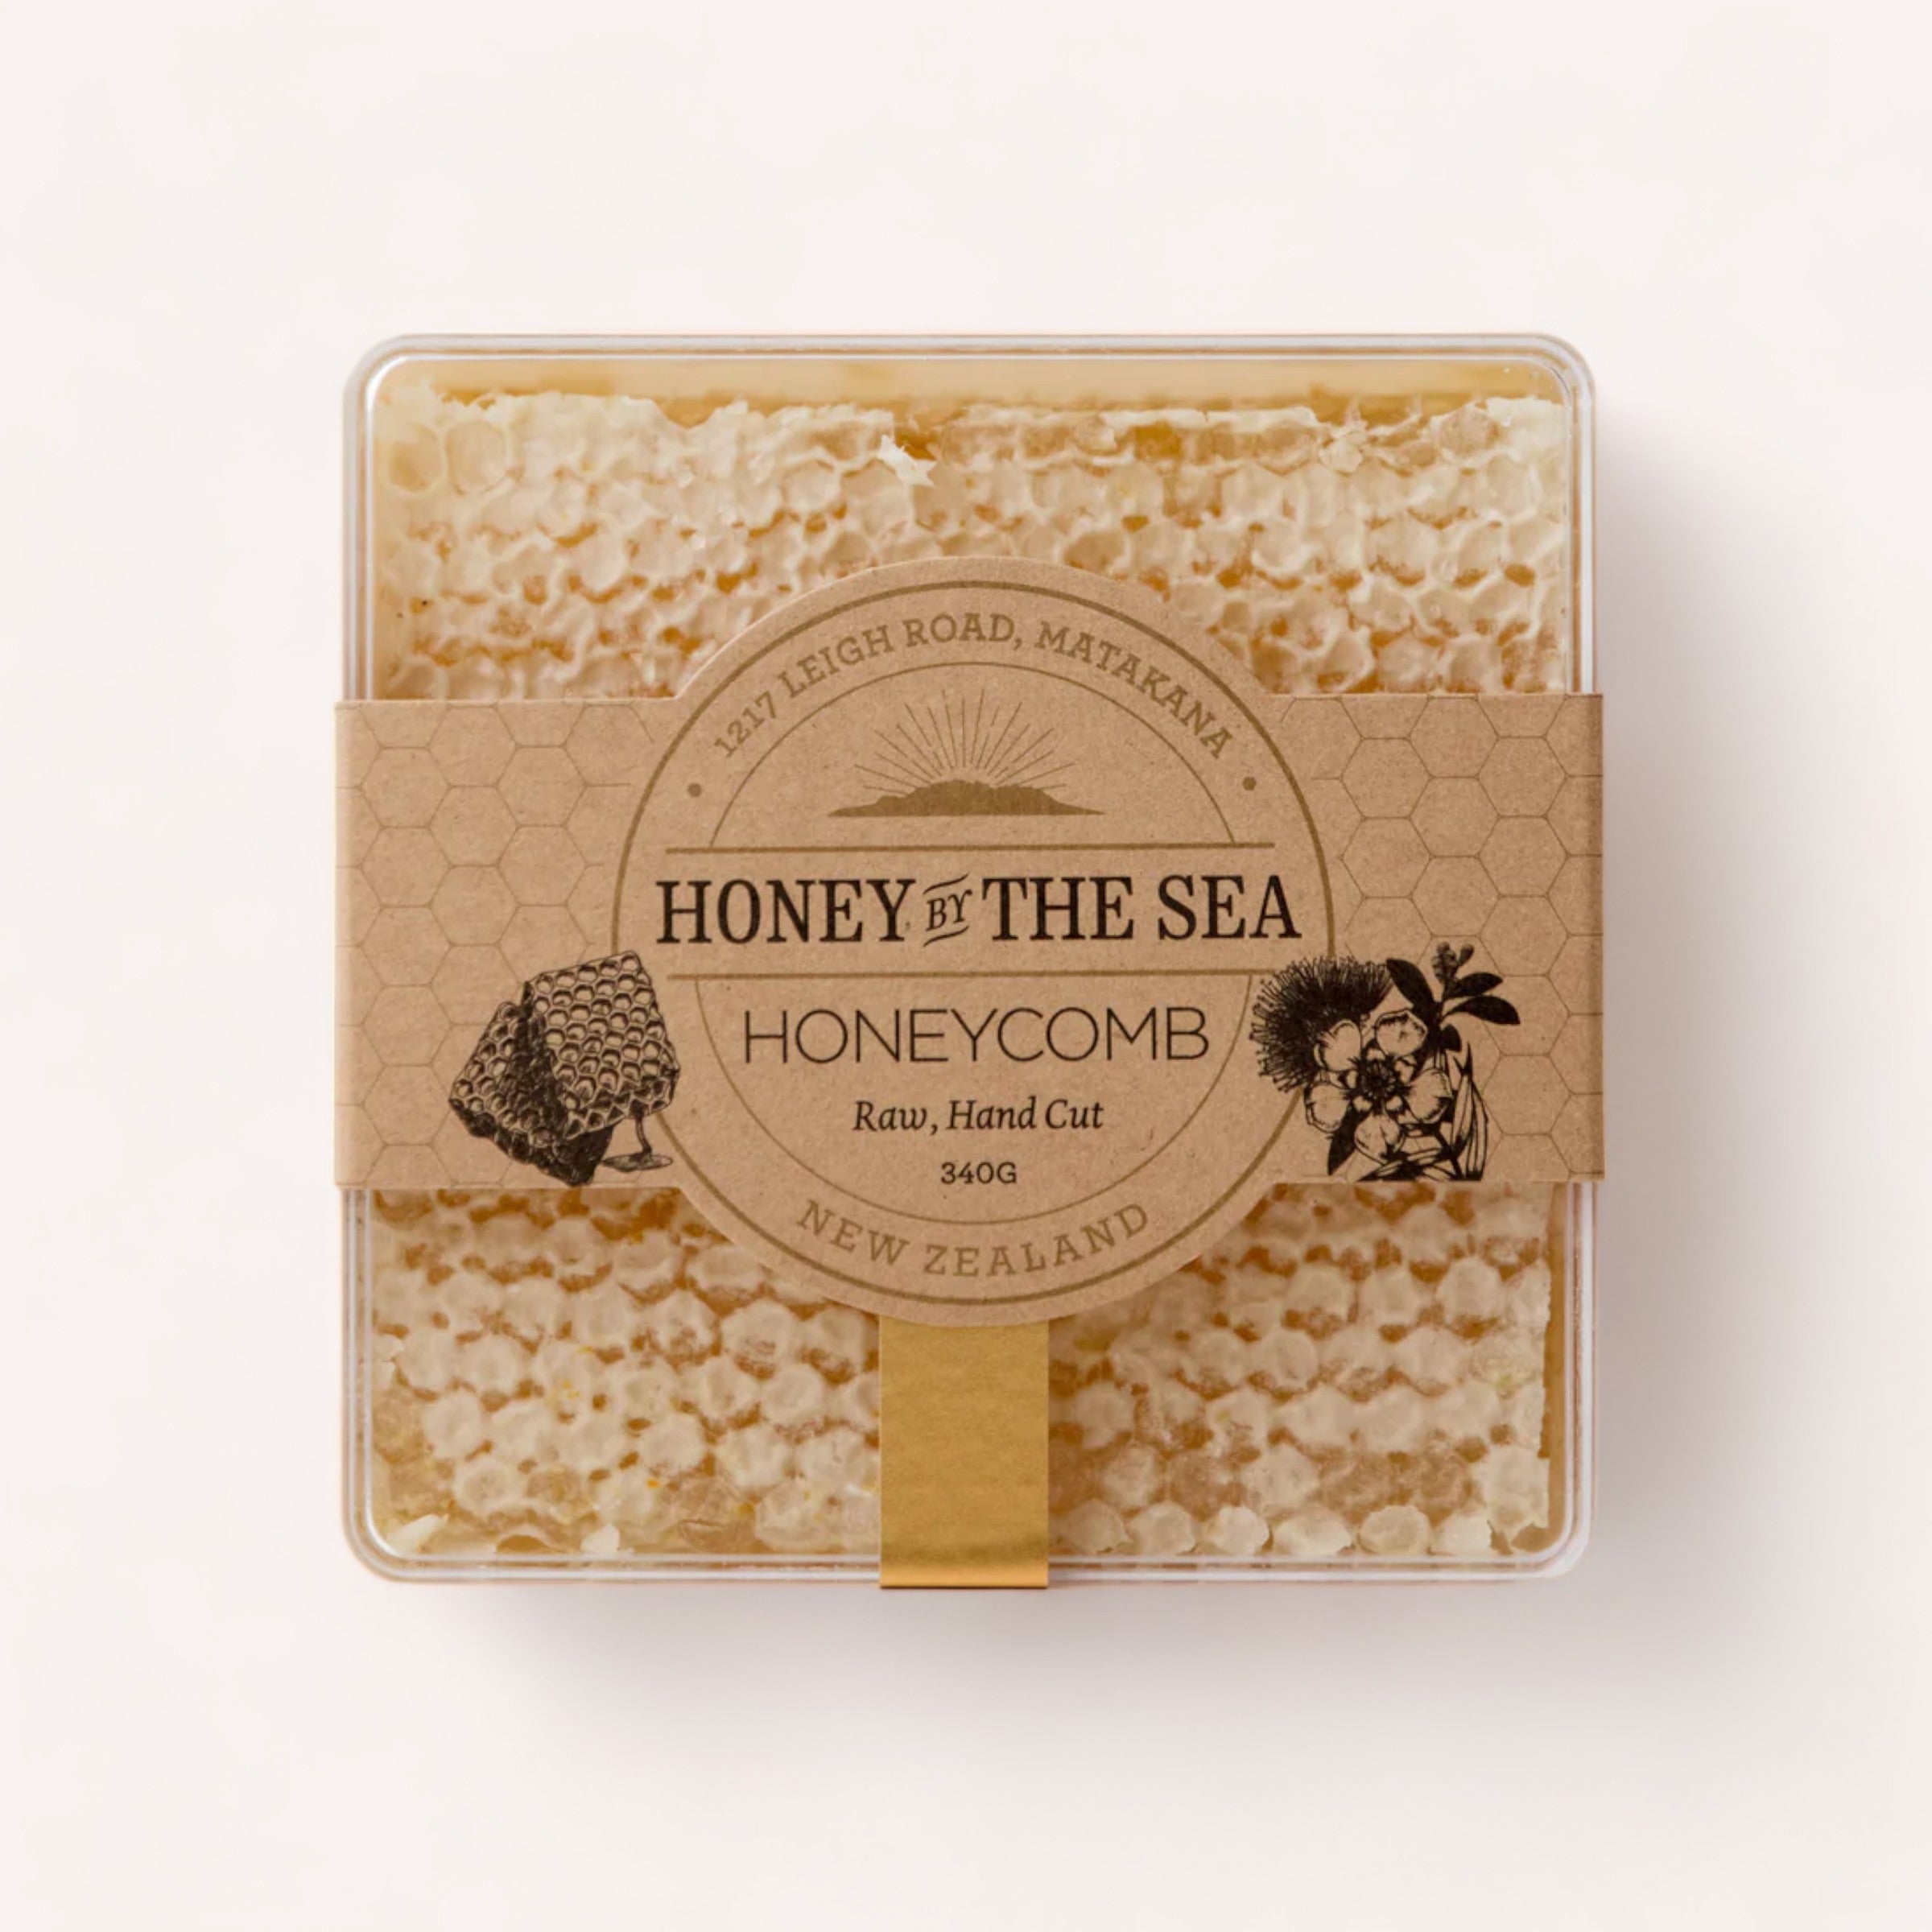 A package of raw, hand-cut Honeycomb by Honey by the Sea from New Zealand honey, with the product neatly presented in a clear box, showcasing the natural texture of the honeycomb against a neutral background.